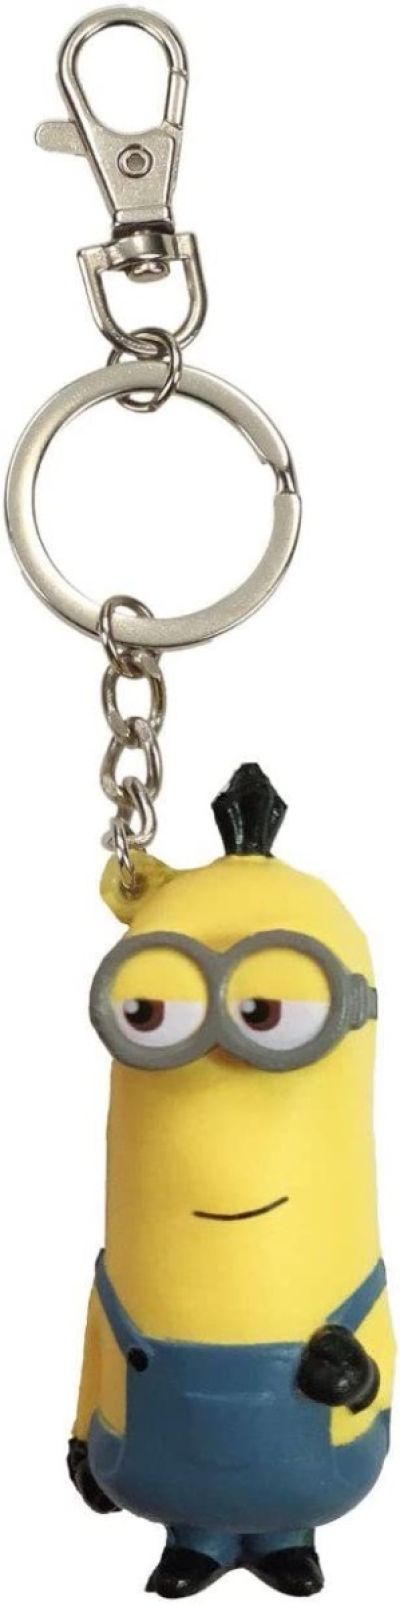 SD Toys Key Ring Stressdoll Despicable Me Minions Kevin